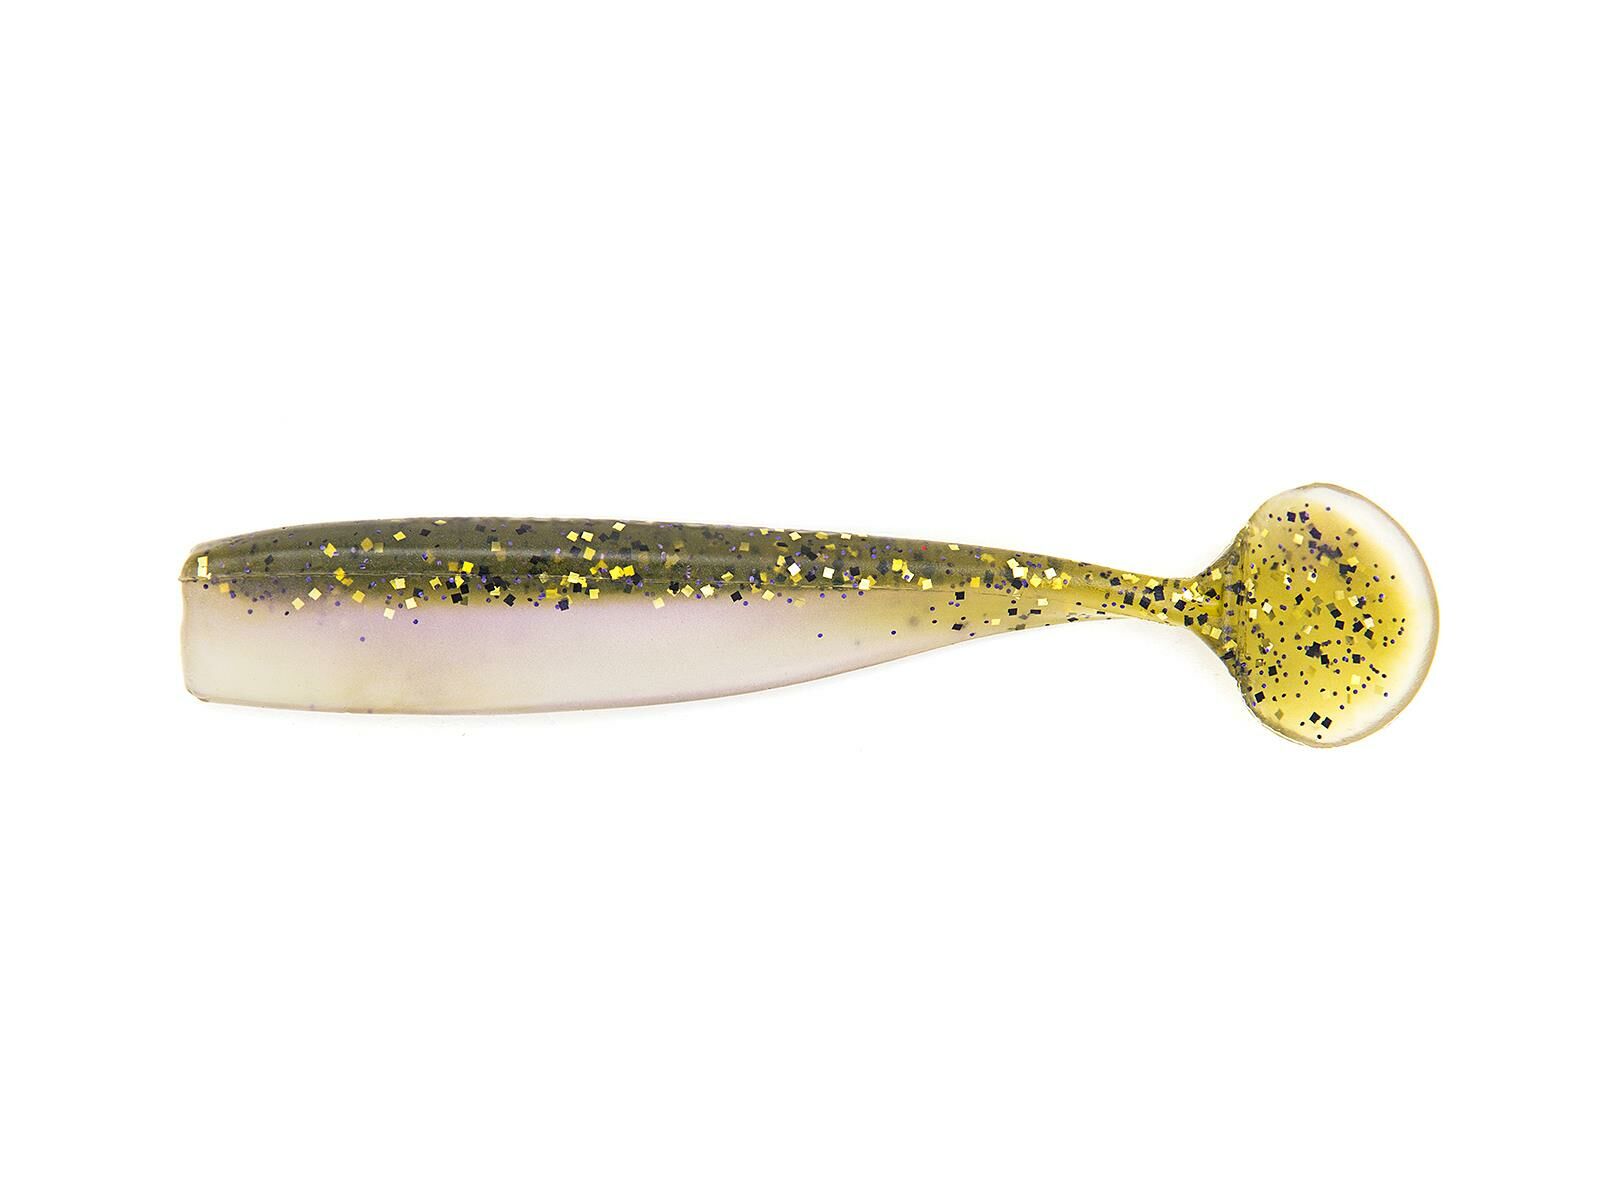 4.5" Shaker - Goby